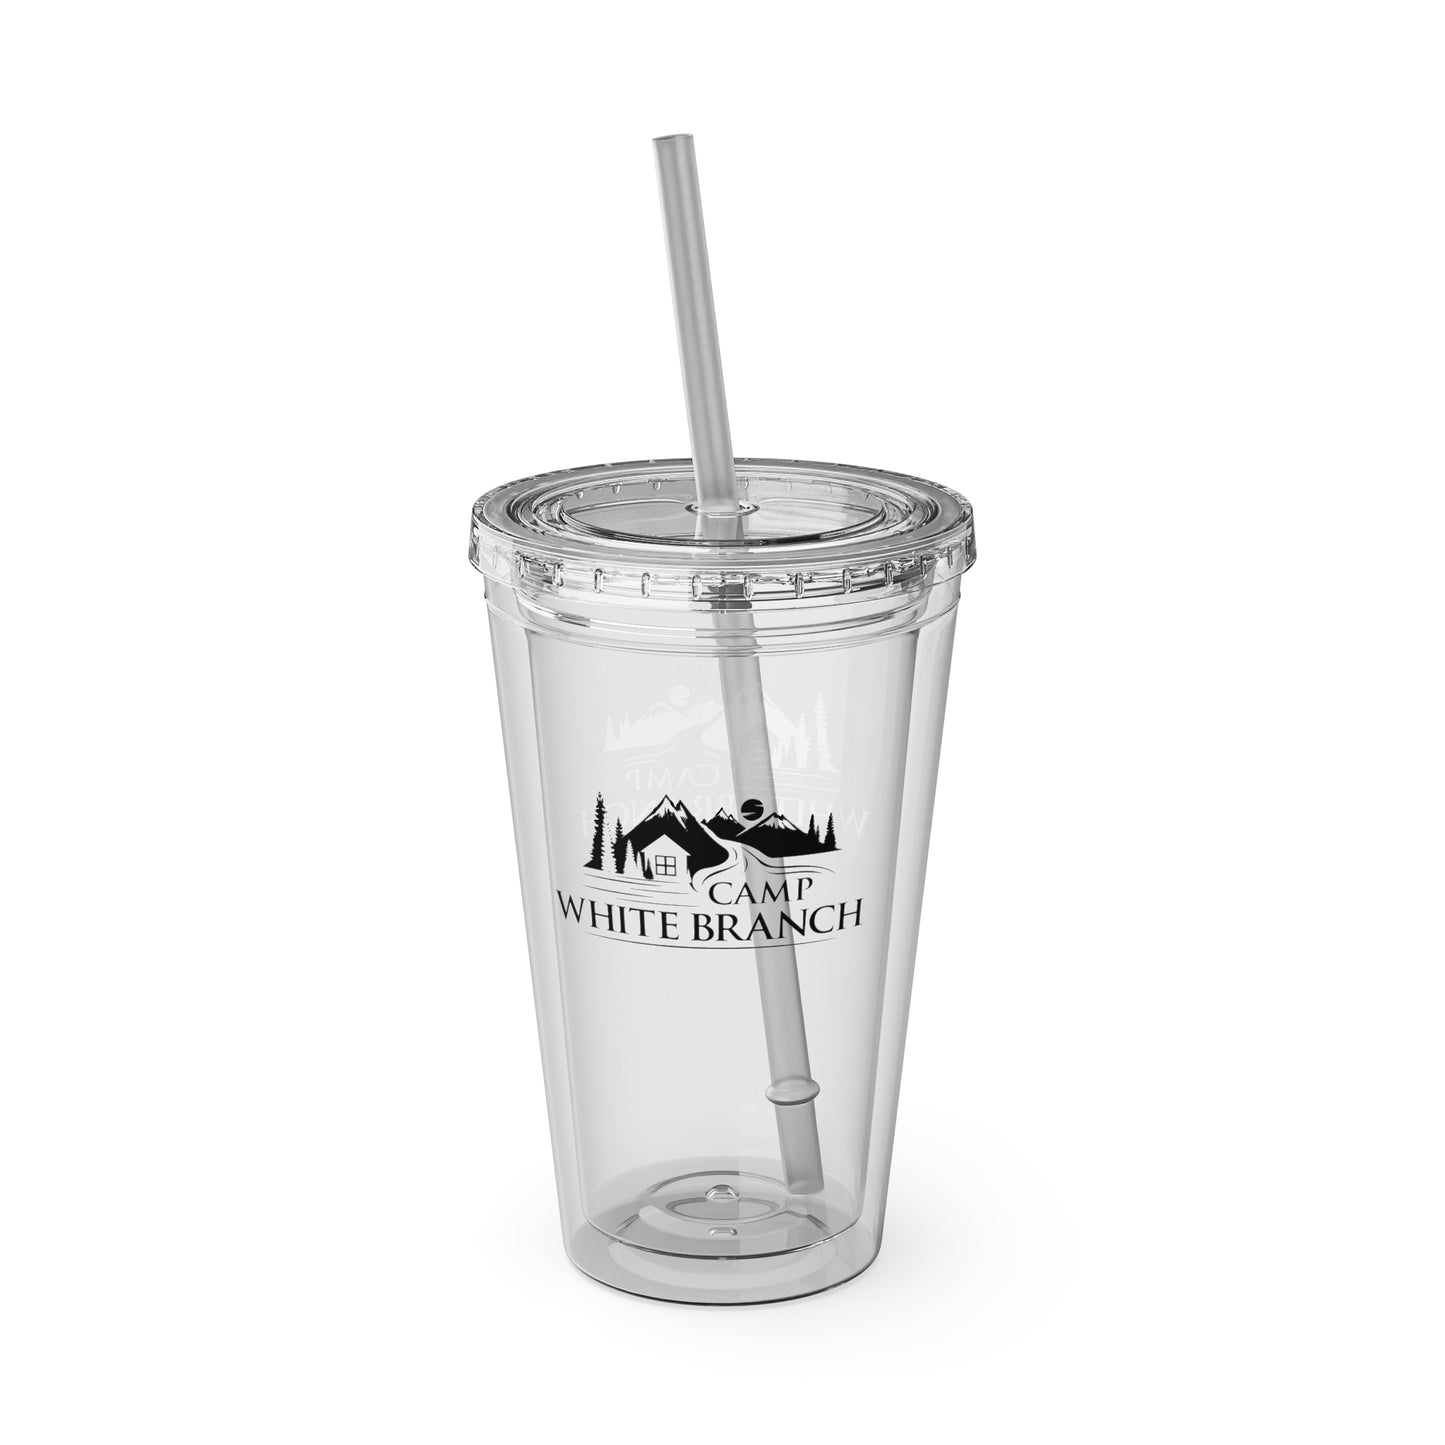 Camp White Branch Tumbler with Straw, 16oz